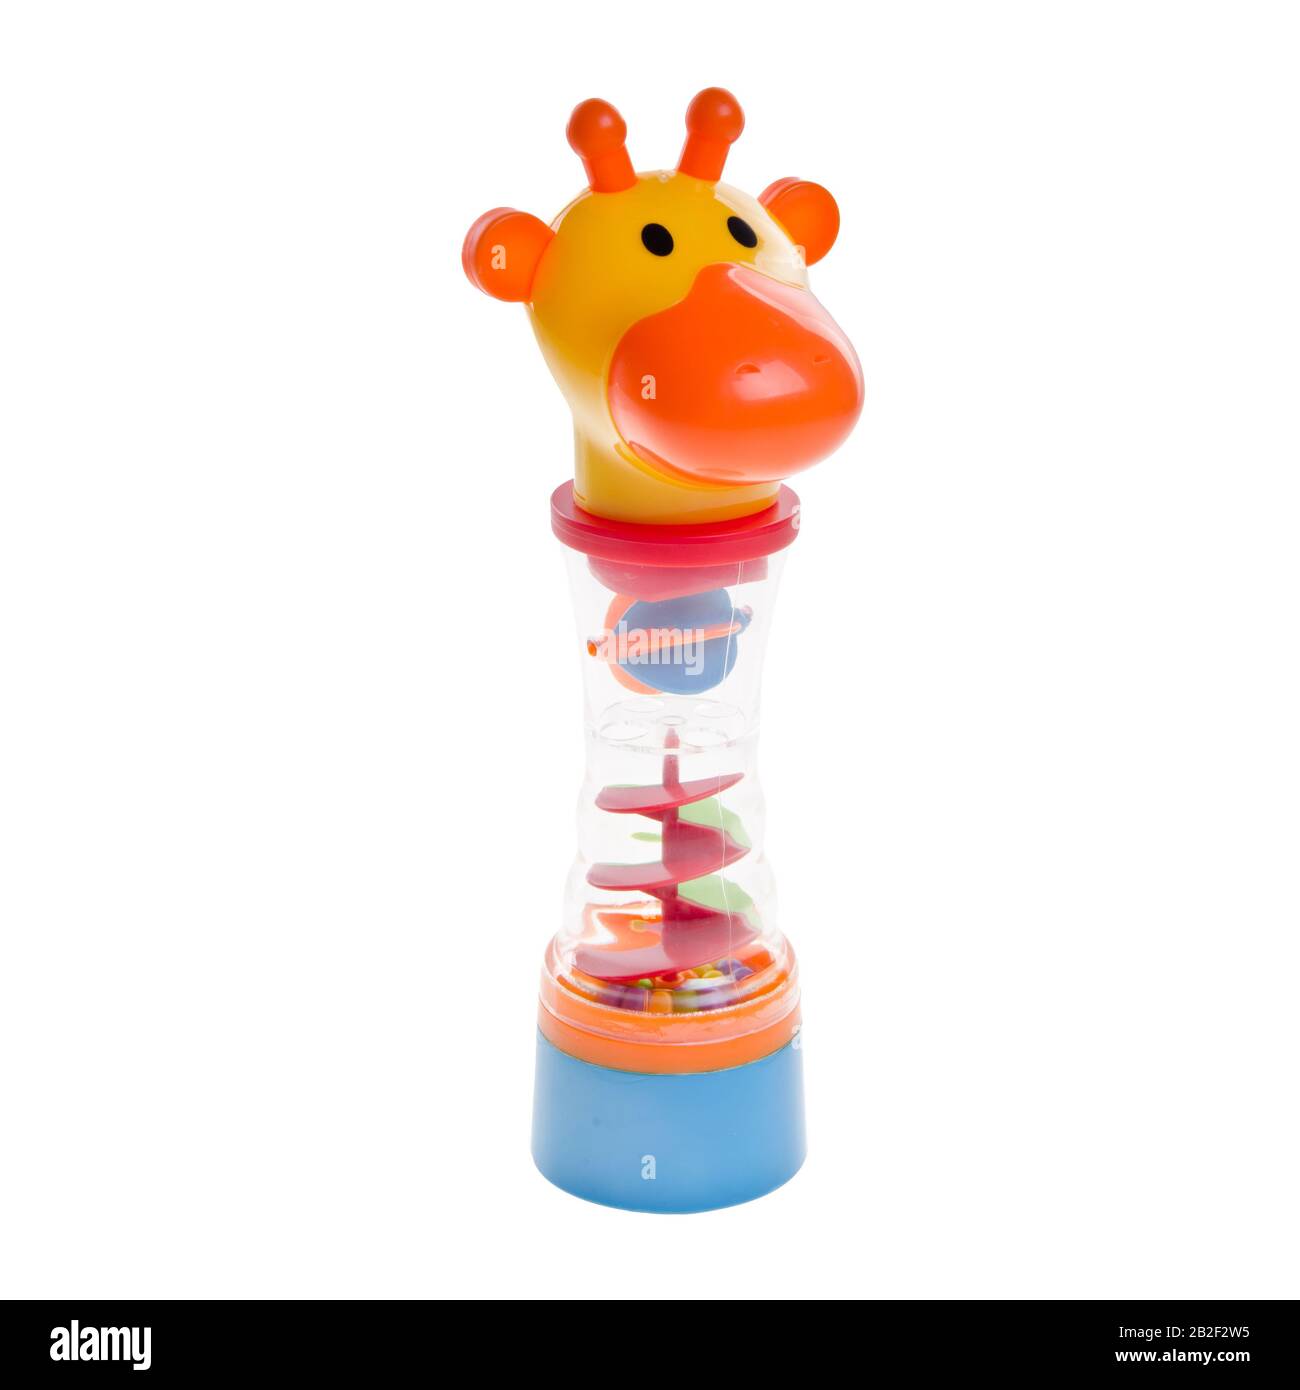 Toy or baby giraffe toys on the background new Stock Photo